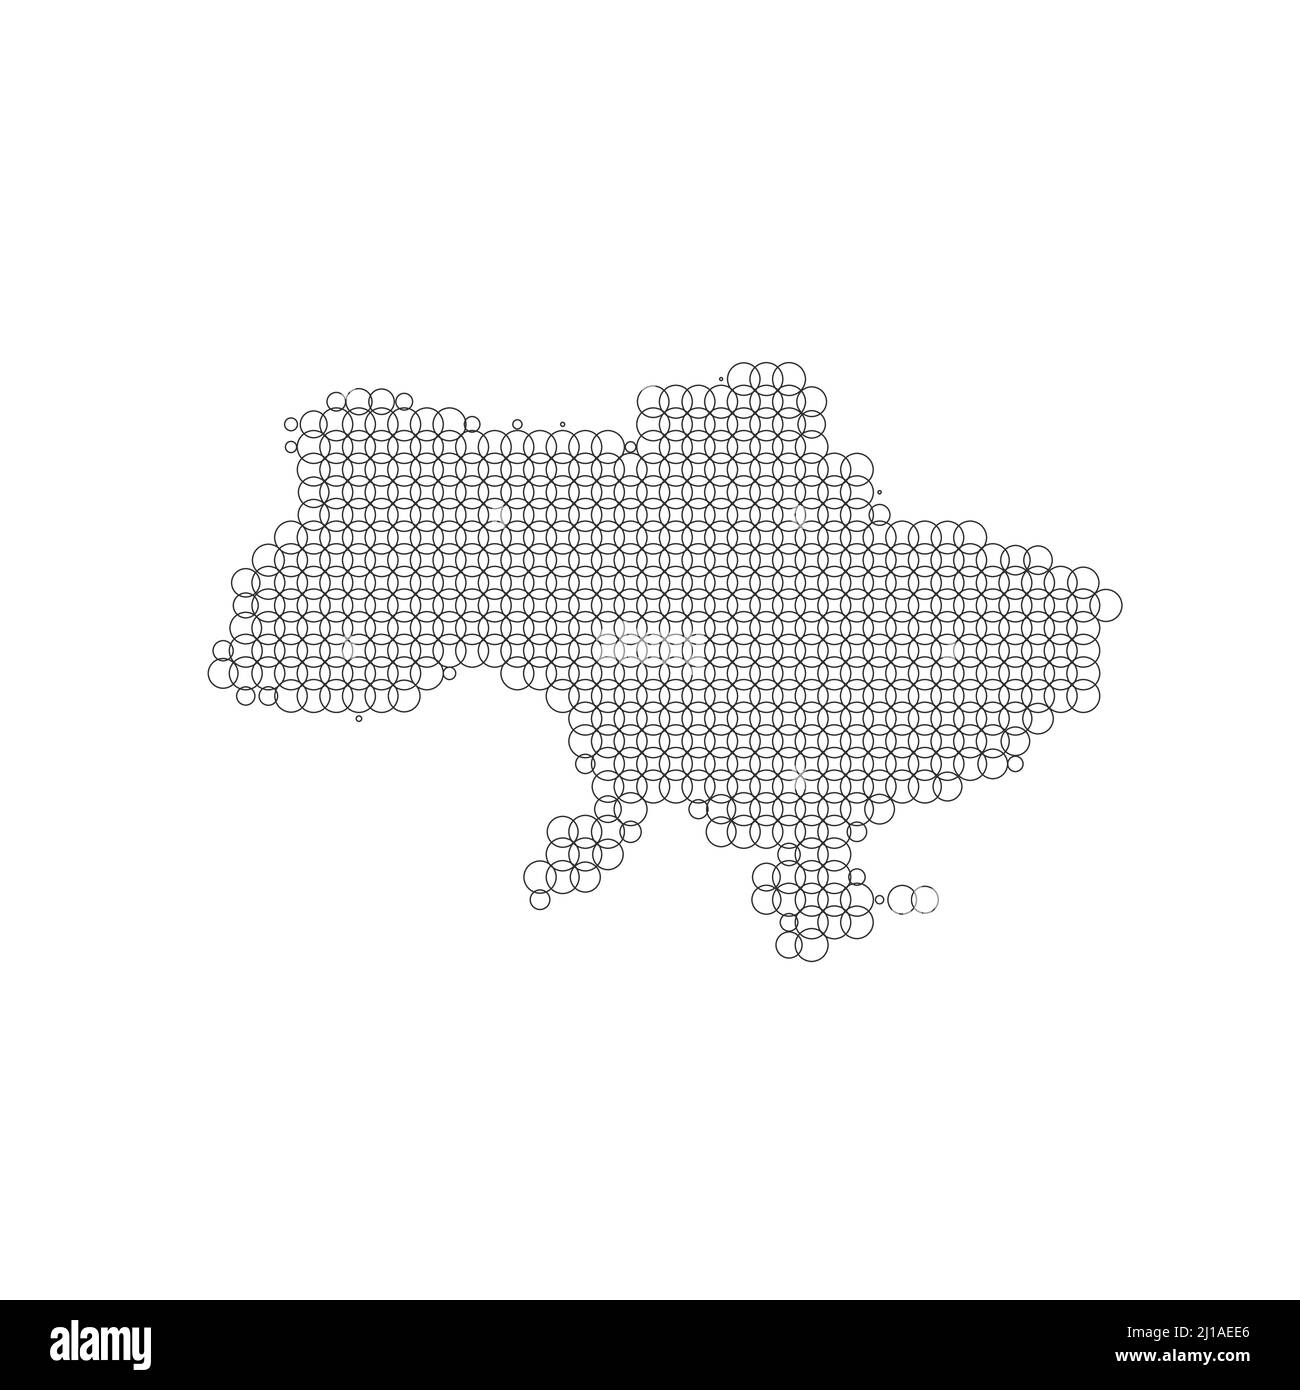 Ukrainian map made out of overlapping circles. Design element. Stock vector illustration isolated Stock Vector